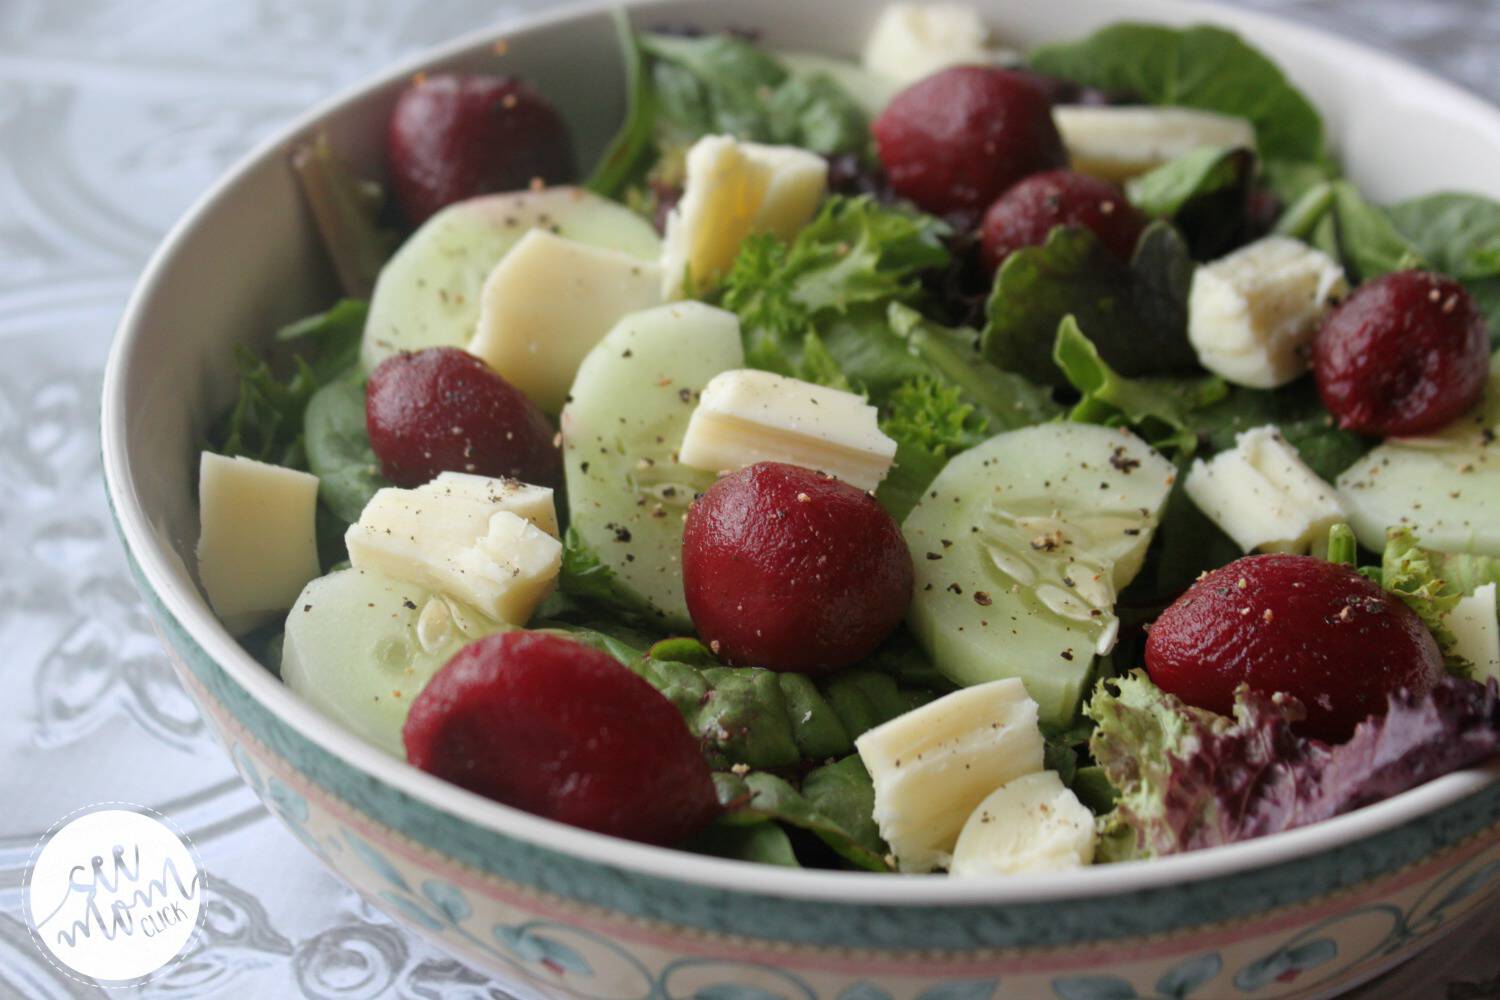 Salad with Beets